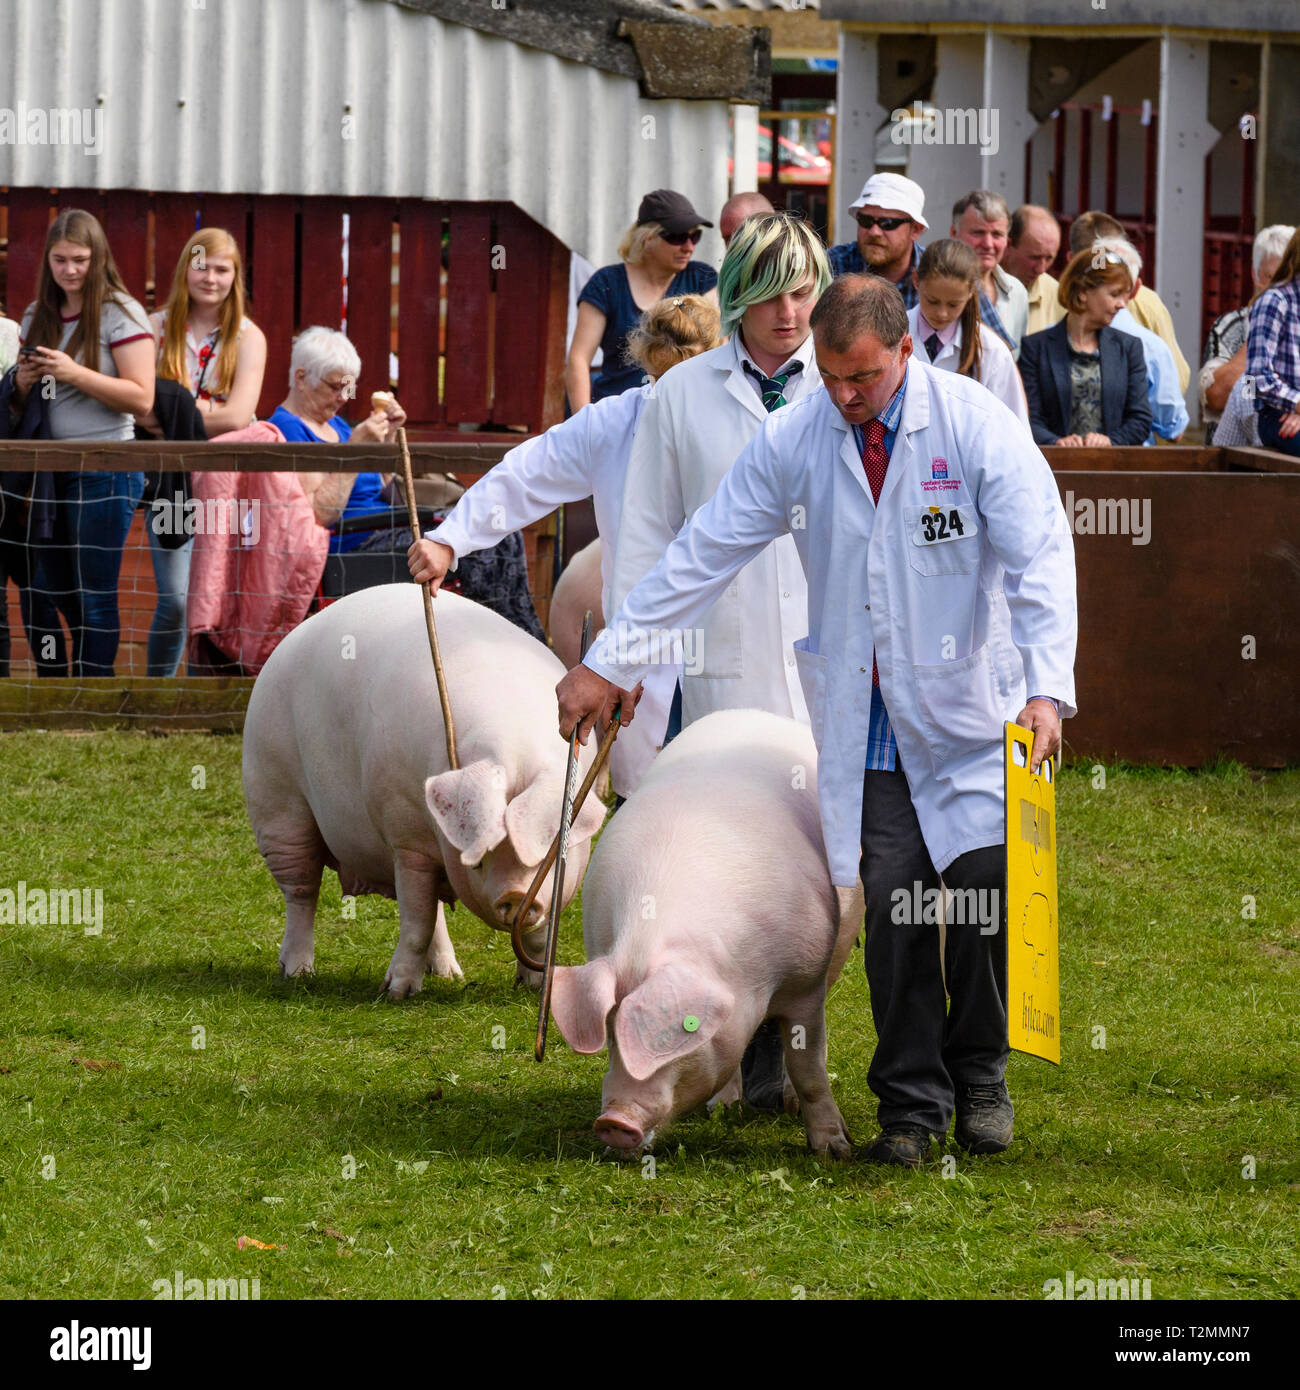 White pigs (sows) & farmers in white coats using sticks & boards, walking in arena watched by crowd - The Great Yorkshire Show, Harrogate, England UK. Stock Photo